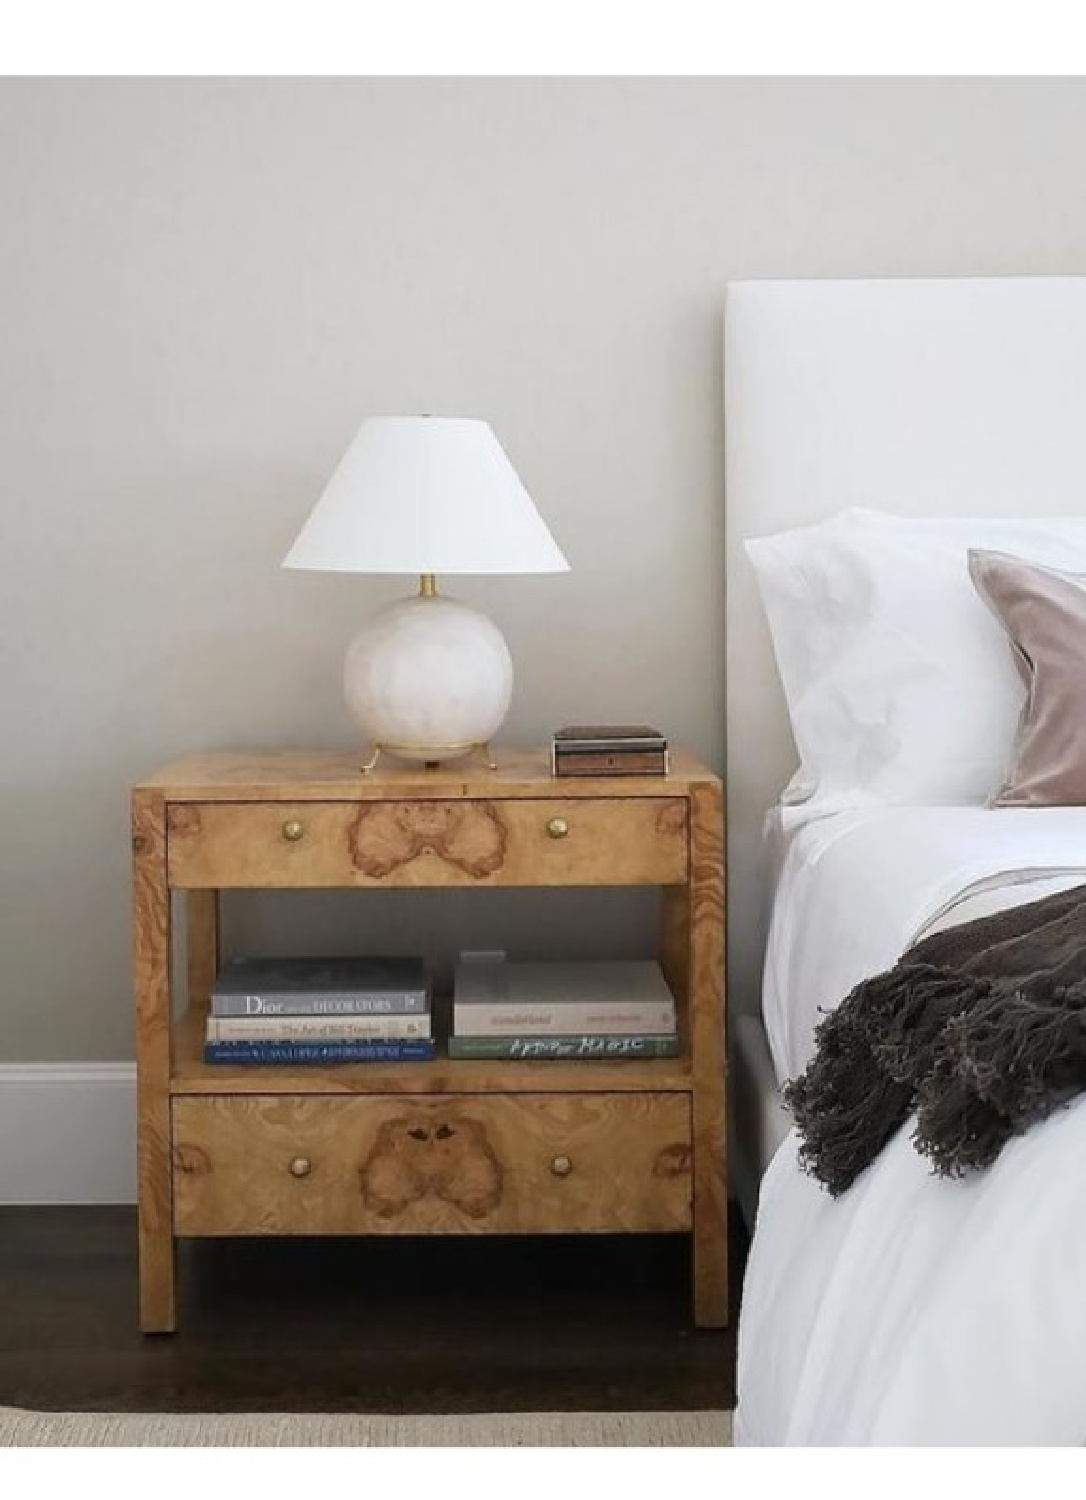 Price small table lamp (Marie Flanigan for Visual Comfort) in a minimal sophisticated bedroom.